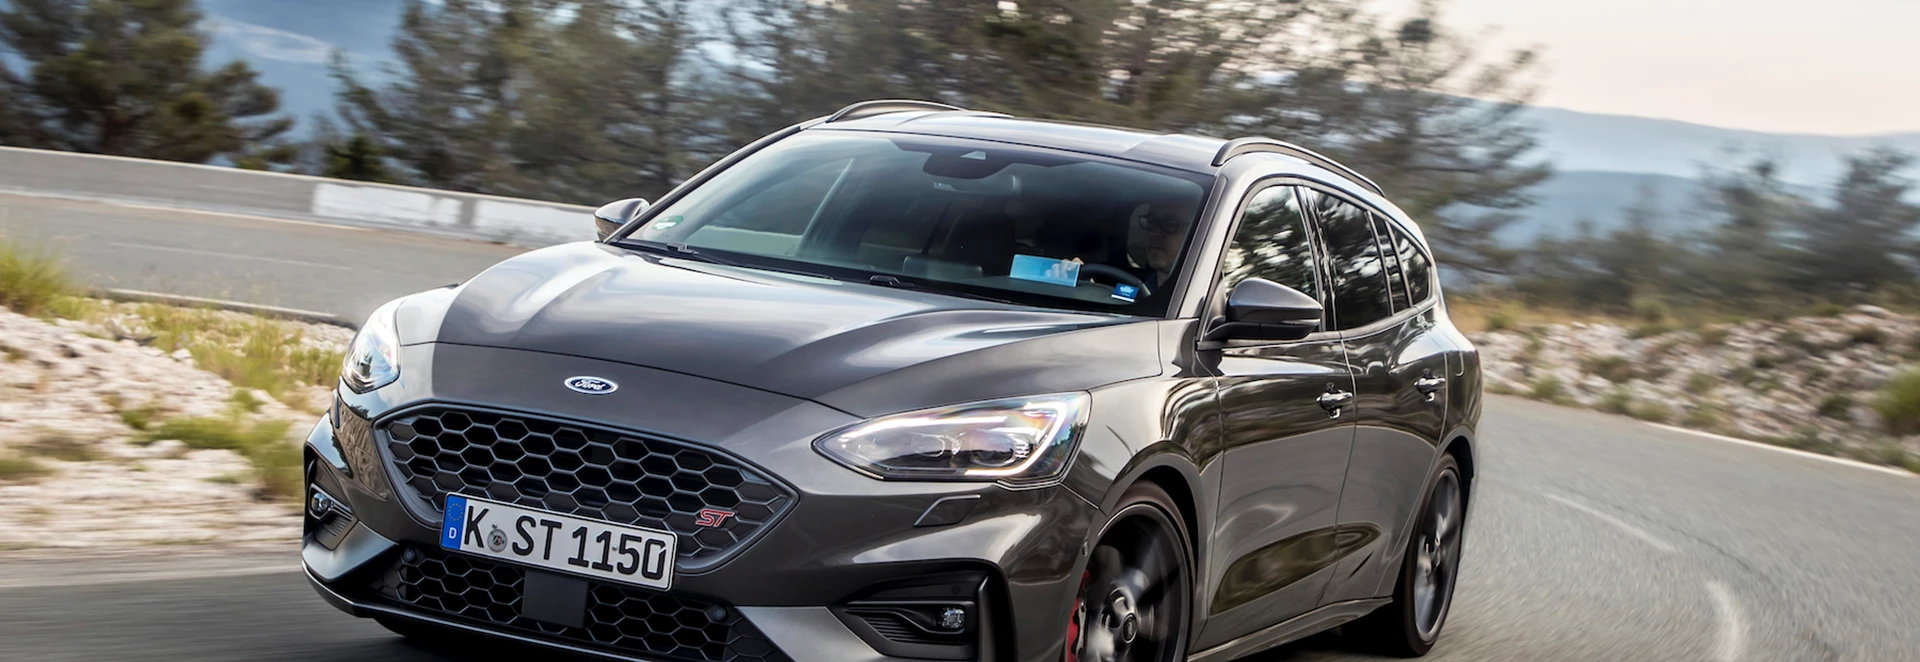 Ford Focus ST Estate 2020 review